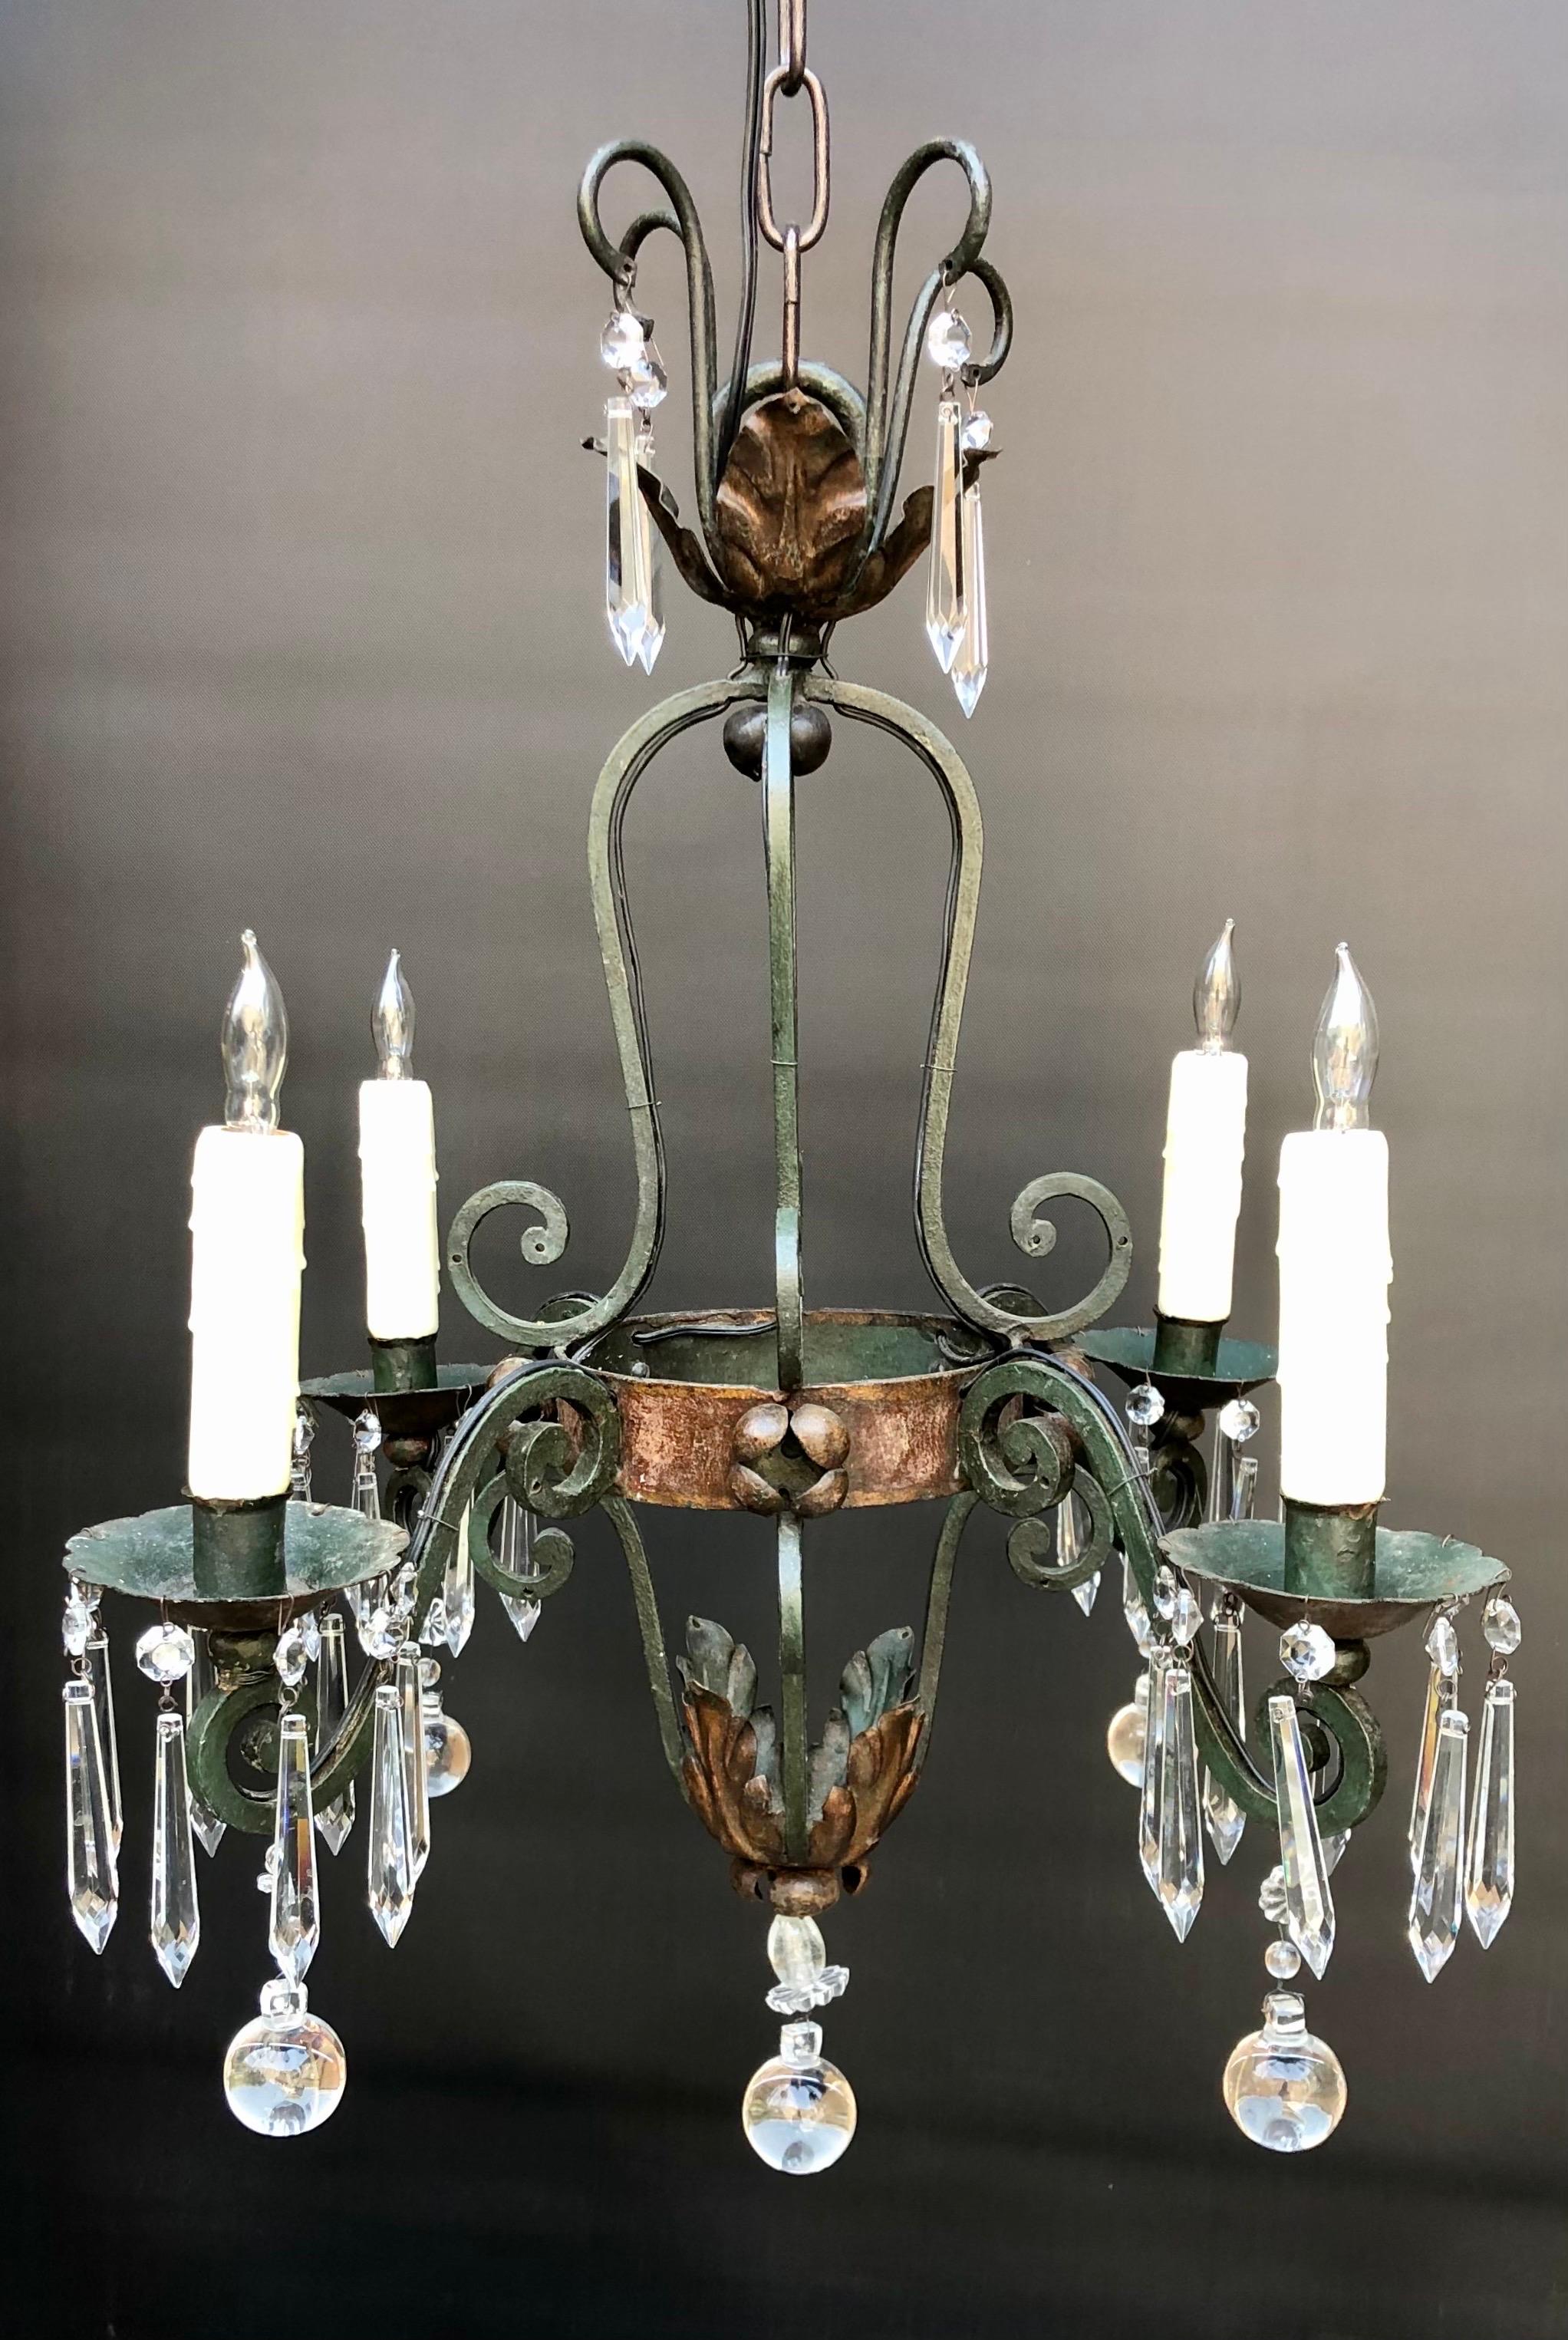 Elegant French wrought iron and crystal four arm chandelier with crystal icicle and ball prisms. The wrought iron has a dark Verde finish with dark bronze on the foliage.